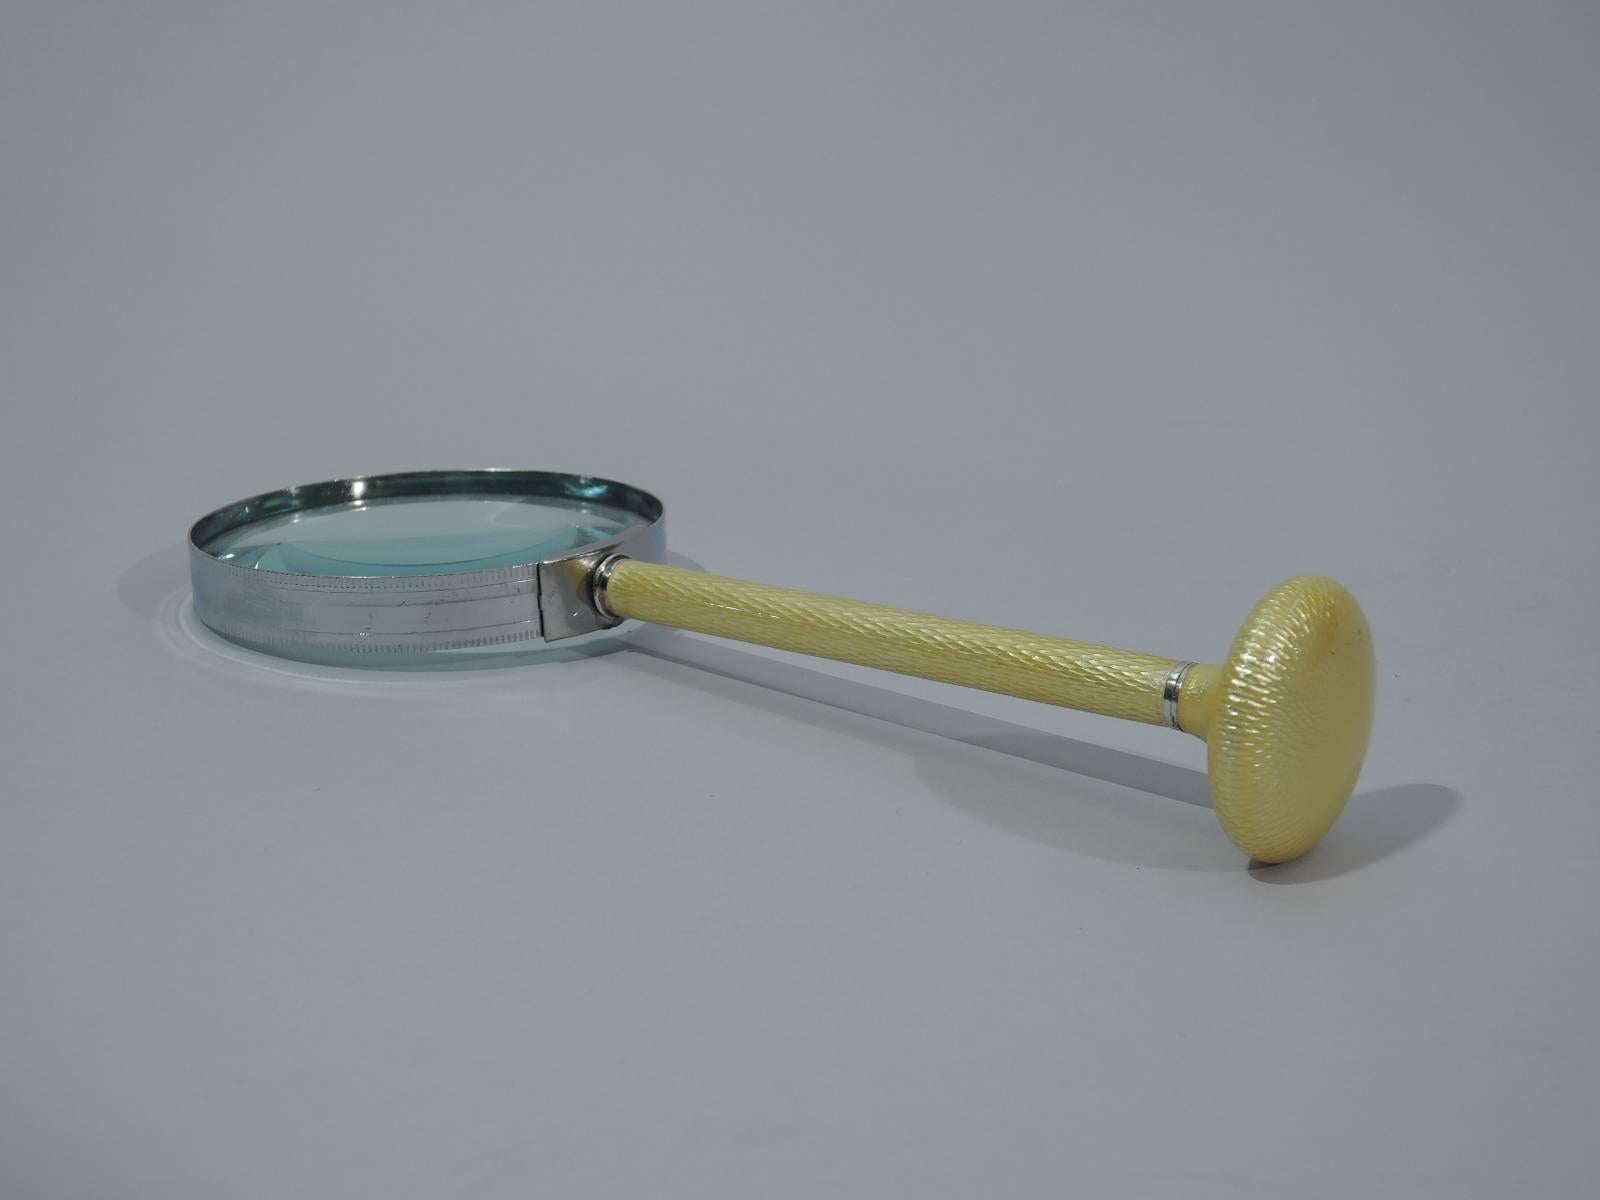 Art Deco magnifying glass, circa 1920. Circular lens mounted to cylindrical handle terminating in perpendicular disc. Handle is in yellow enamel with engine-turned wave pattern. Smart and modern.